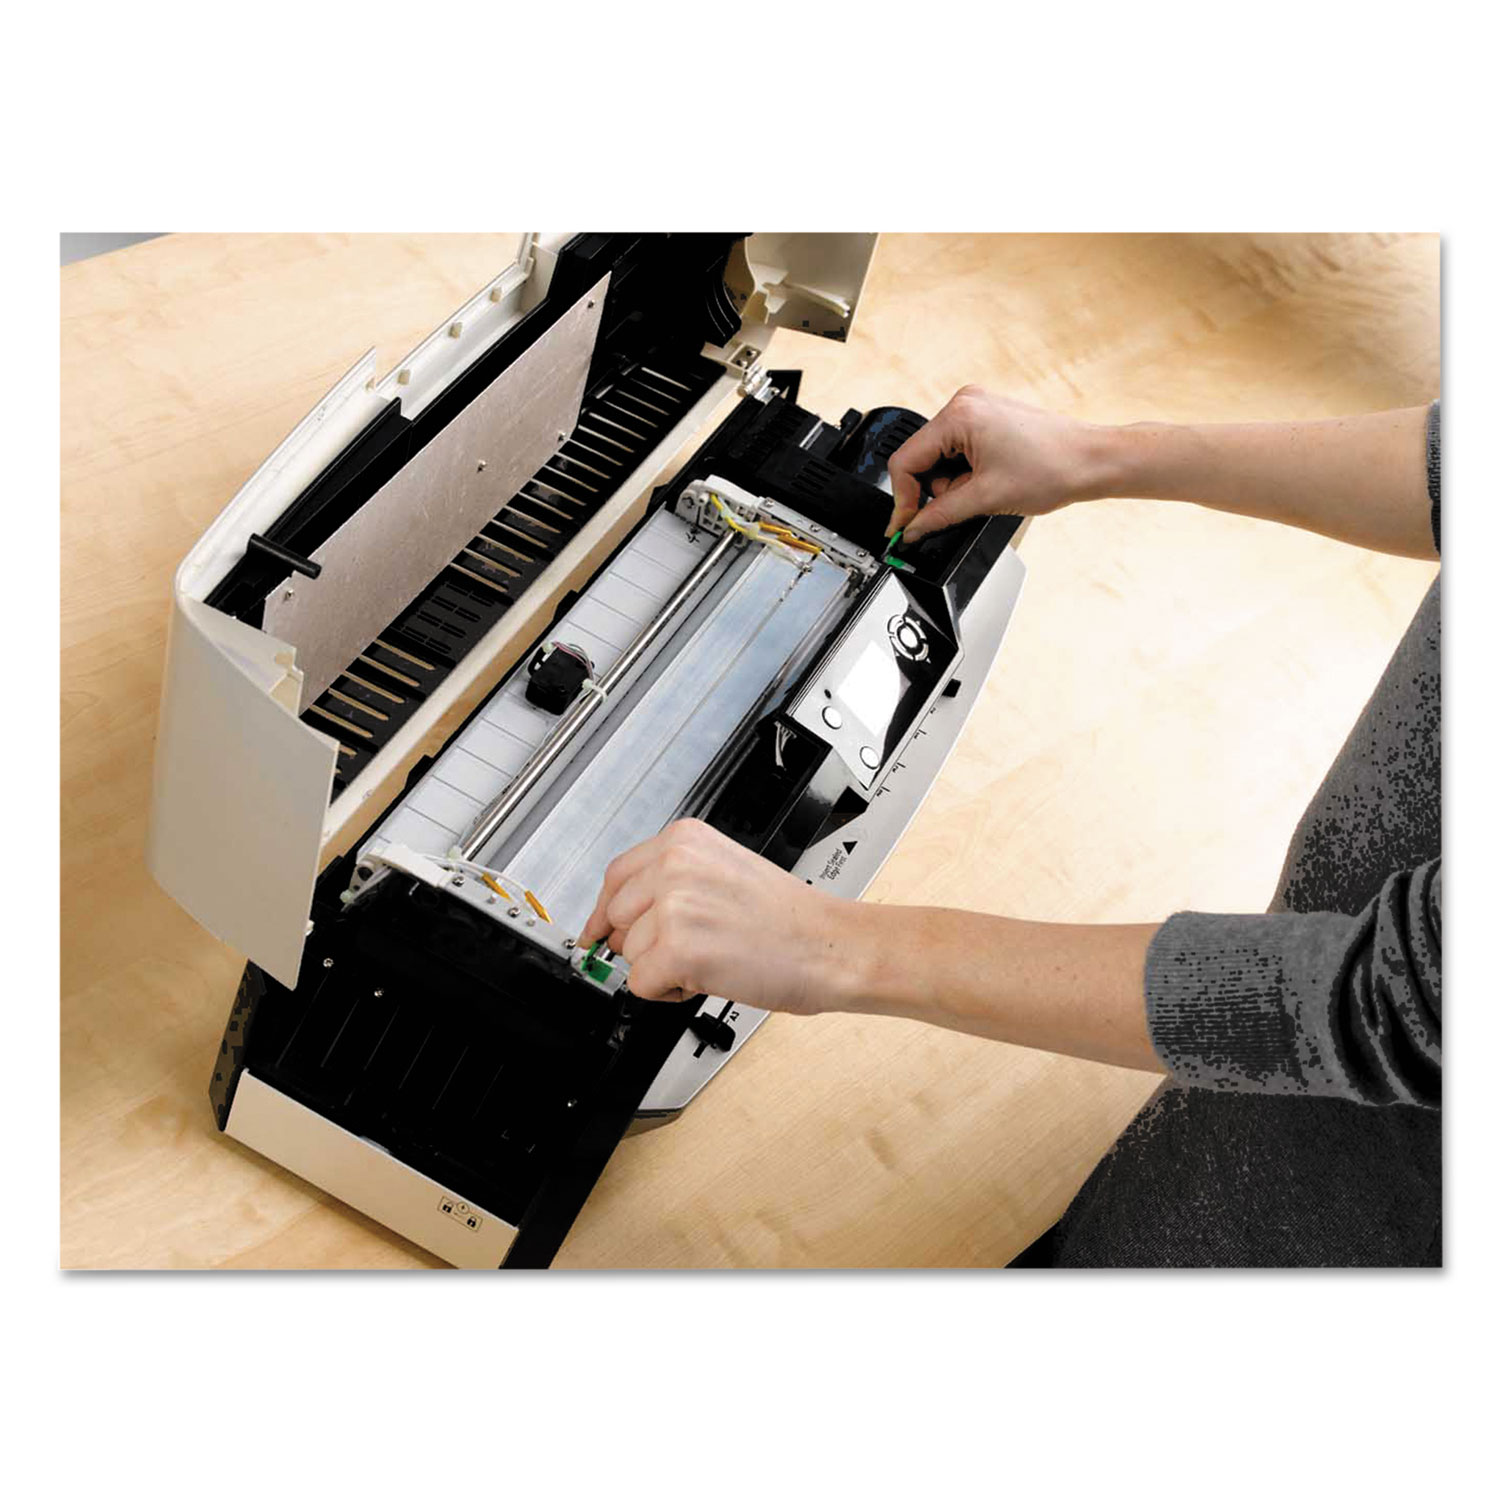 Voyager 125 Laminator, 12 Wide x 10mil Max Thickness